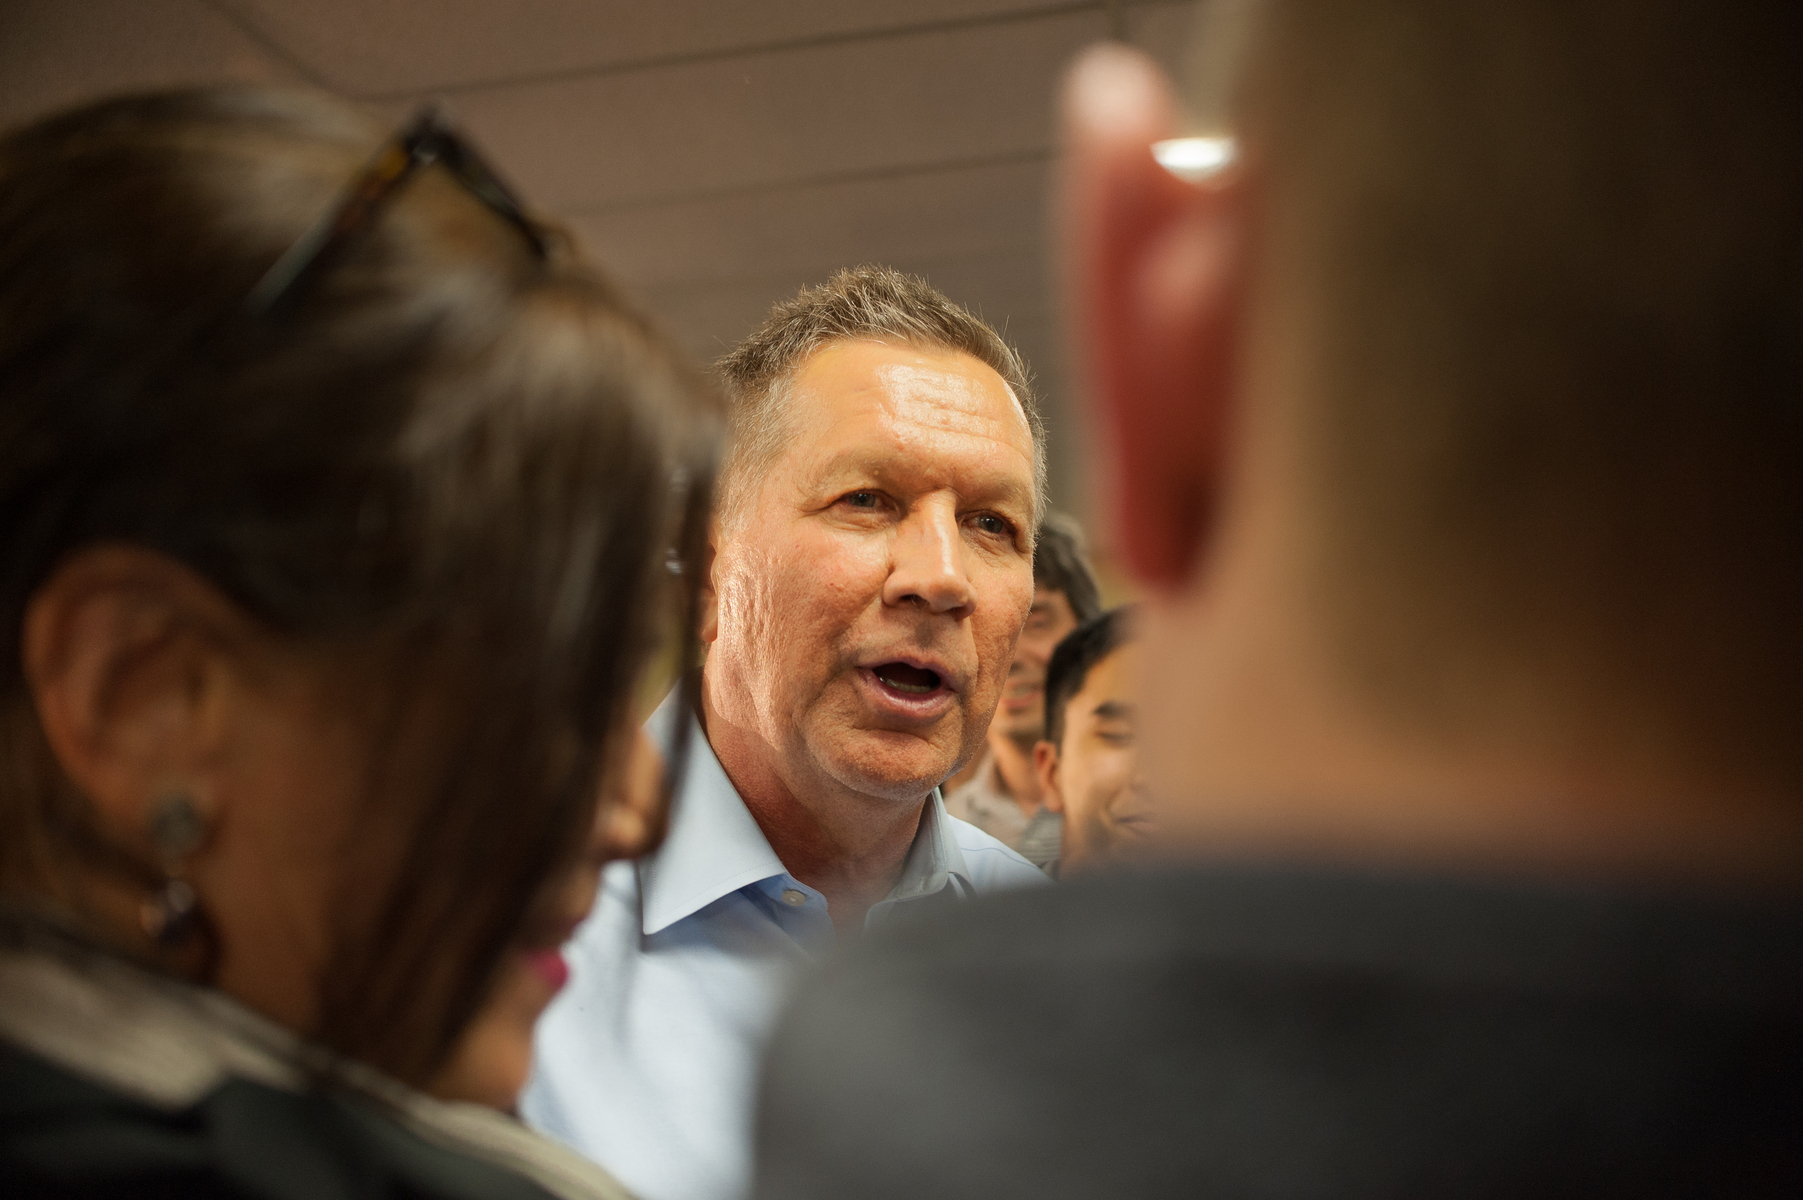 February 23, 2016. Sandy Springs, GA. Presidential hopeful Governor John Kasich (R-OH) speaks to supporters at a rally in Sandy Springs, GA.